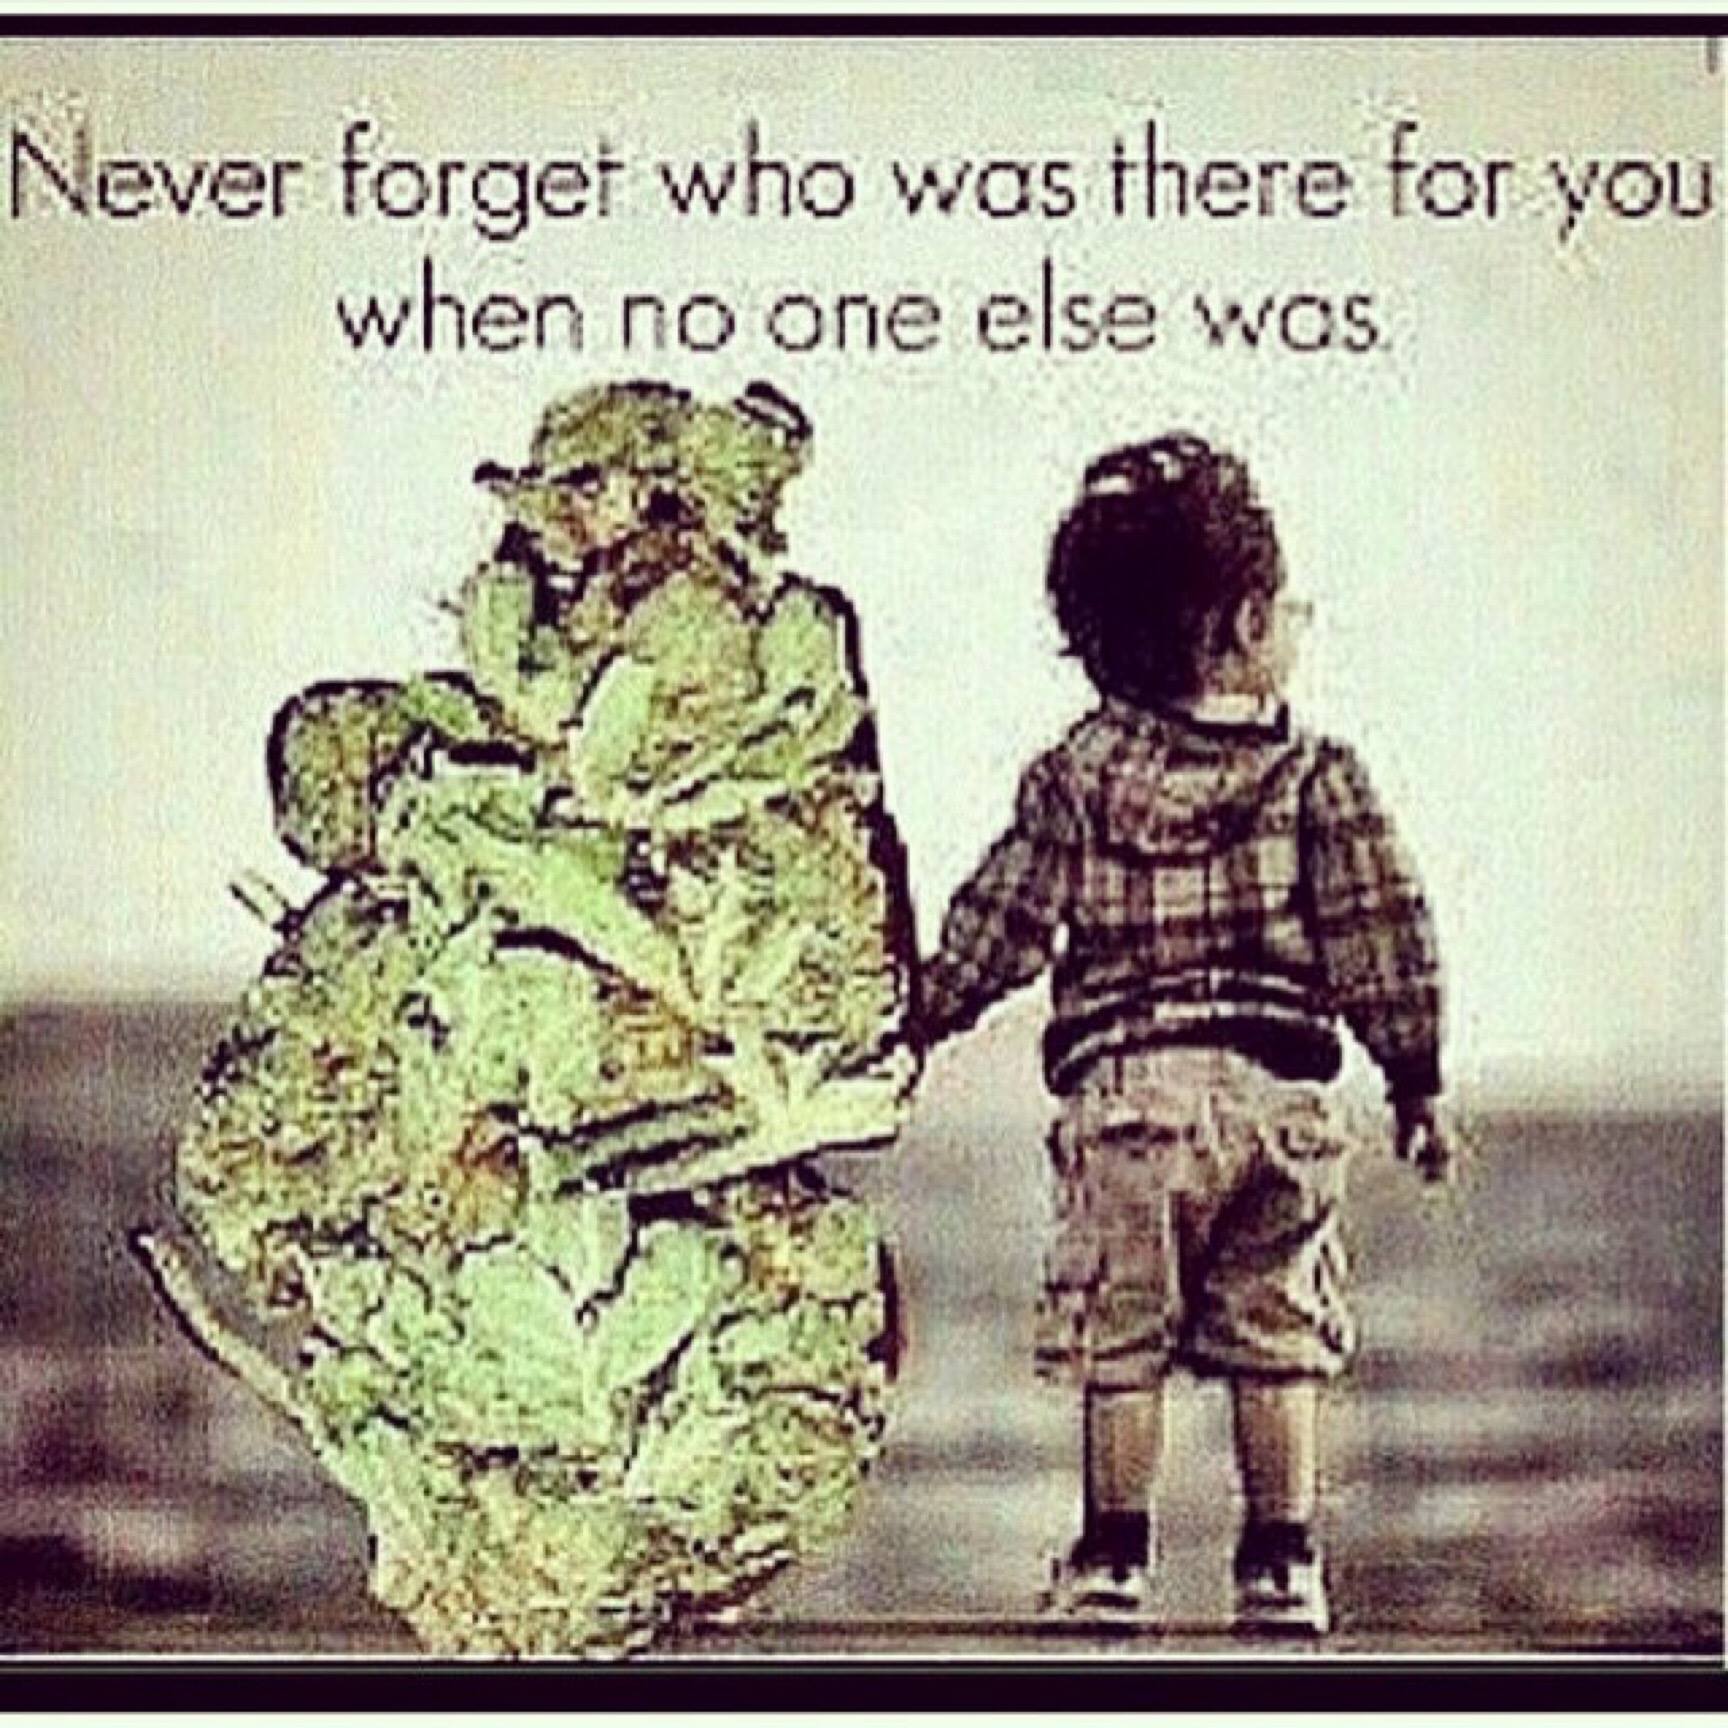 never forget who was there for you when no one else was